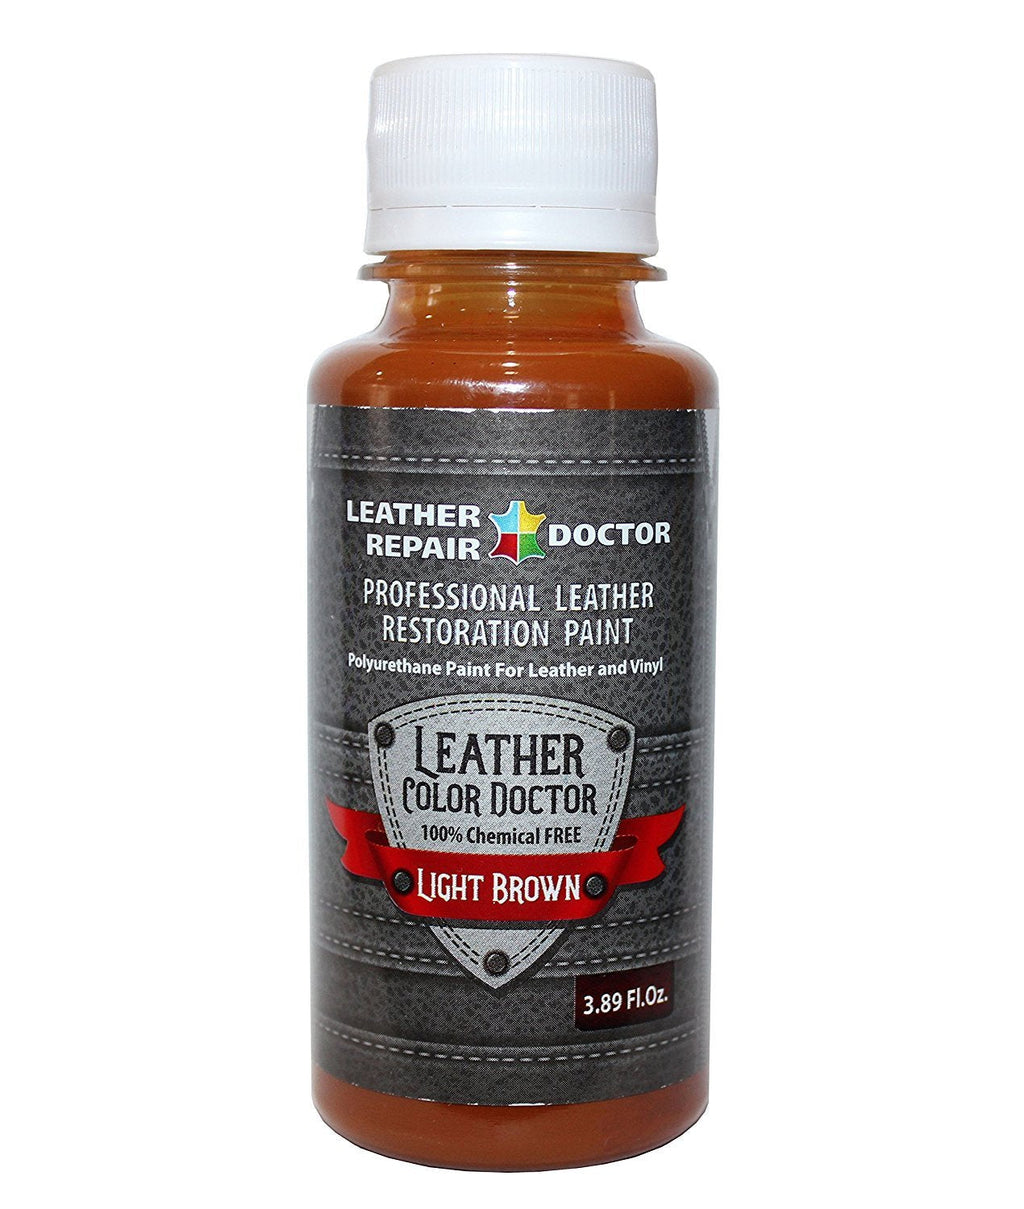  [AUSTRALIA] - Professional Light Brown Leather Paint For Touch-Up, Recoloring and Restoration - Shoes, Jacket, Purse, Belt, Couch Chair, Sofa, Motorcycle and Car Seat